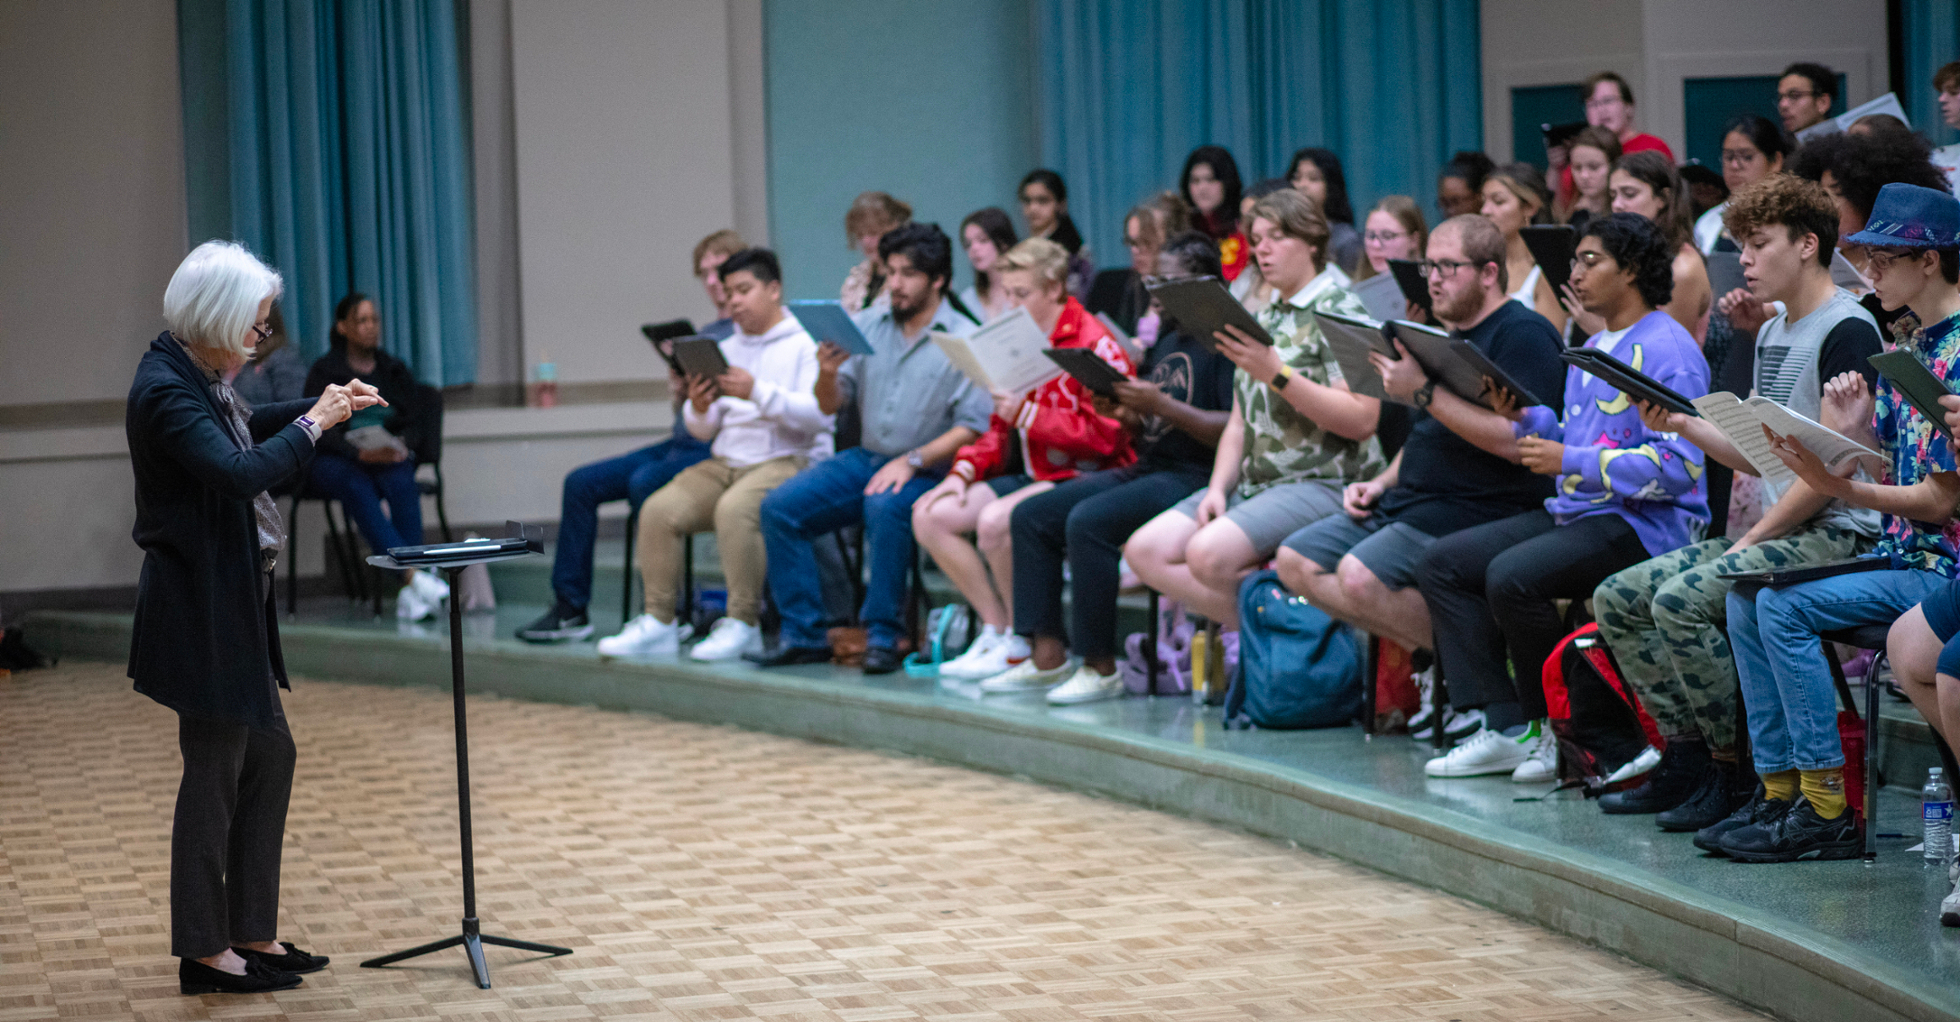 Dr. Betsy Cook Weber conducting the Moores School of Music Concert Chorale in rehearsal